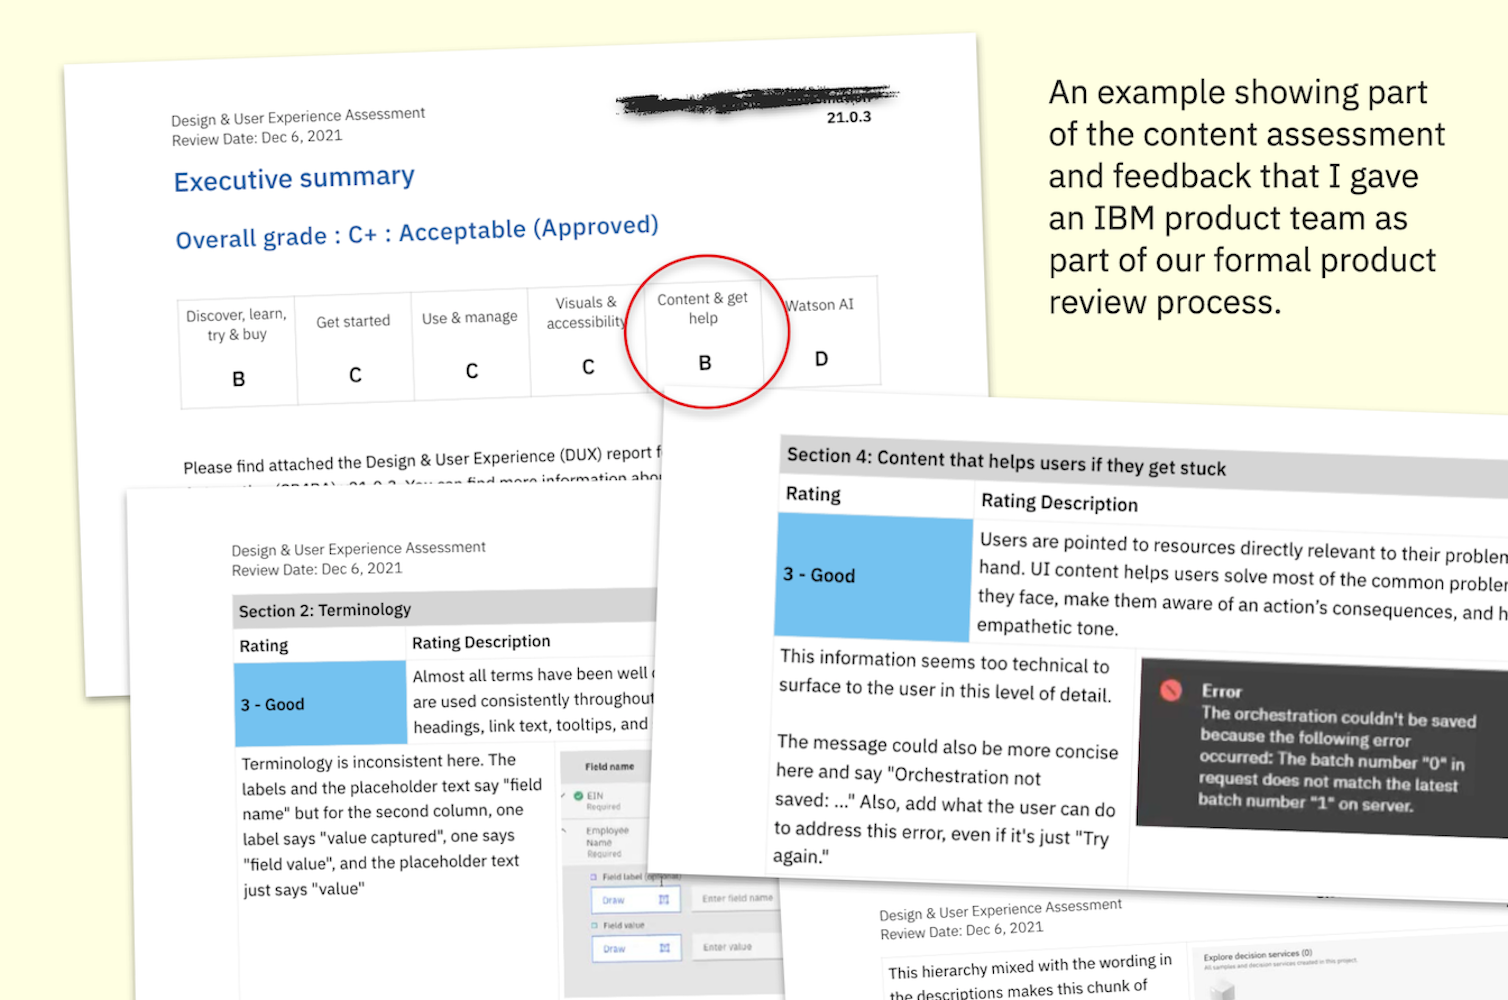 Examples of the detailed content reviews I provide to product teams